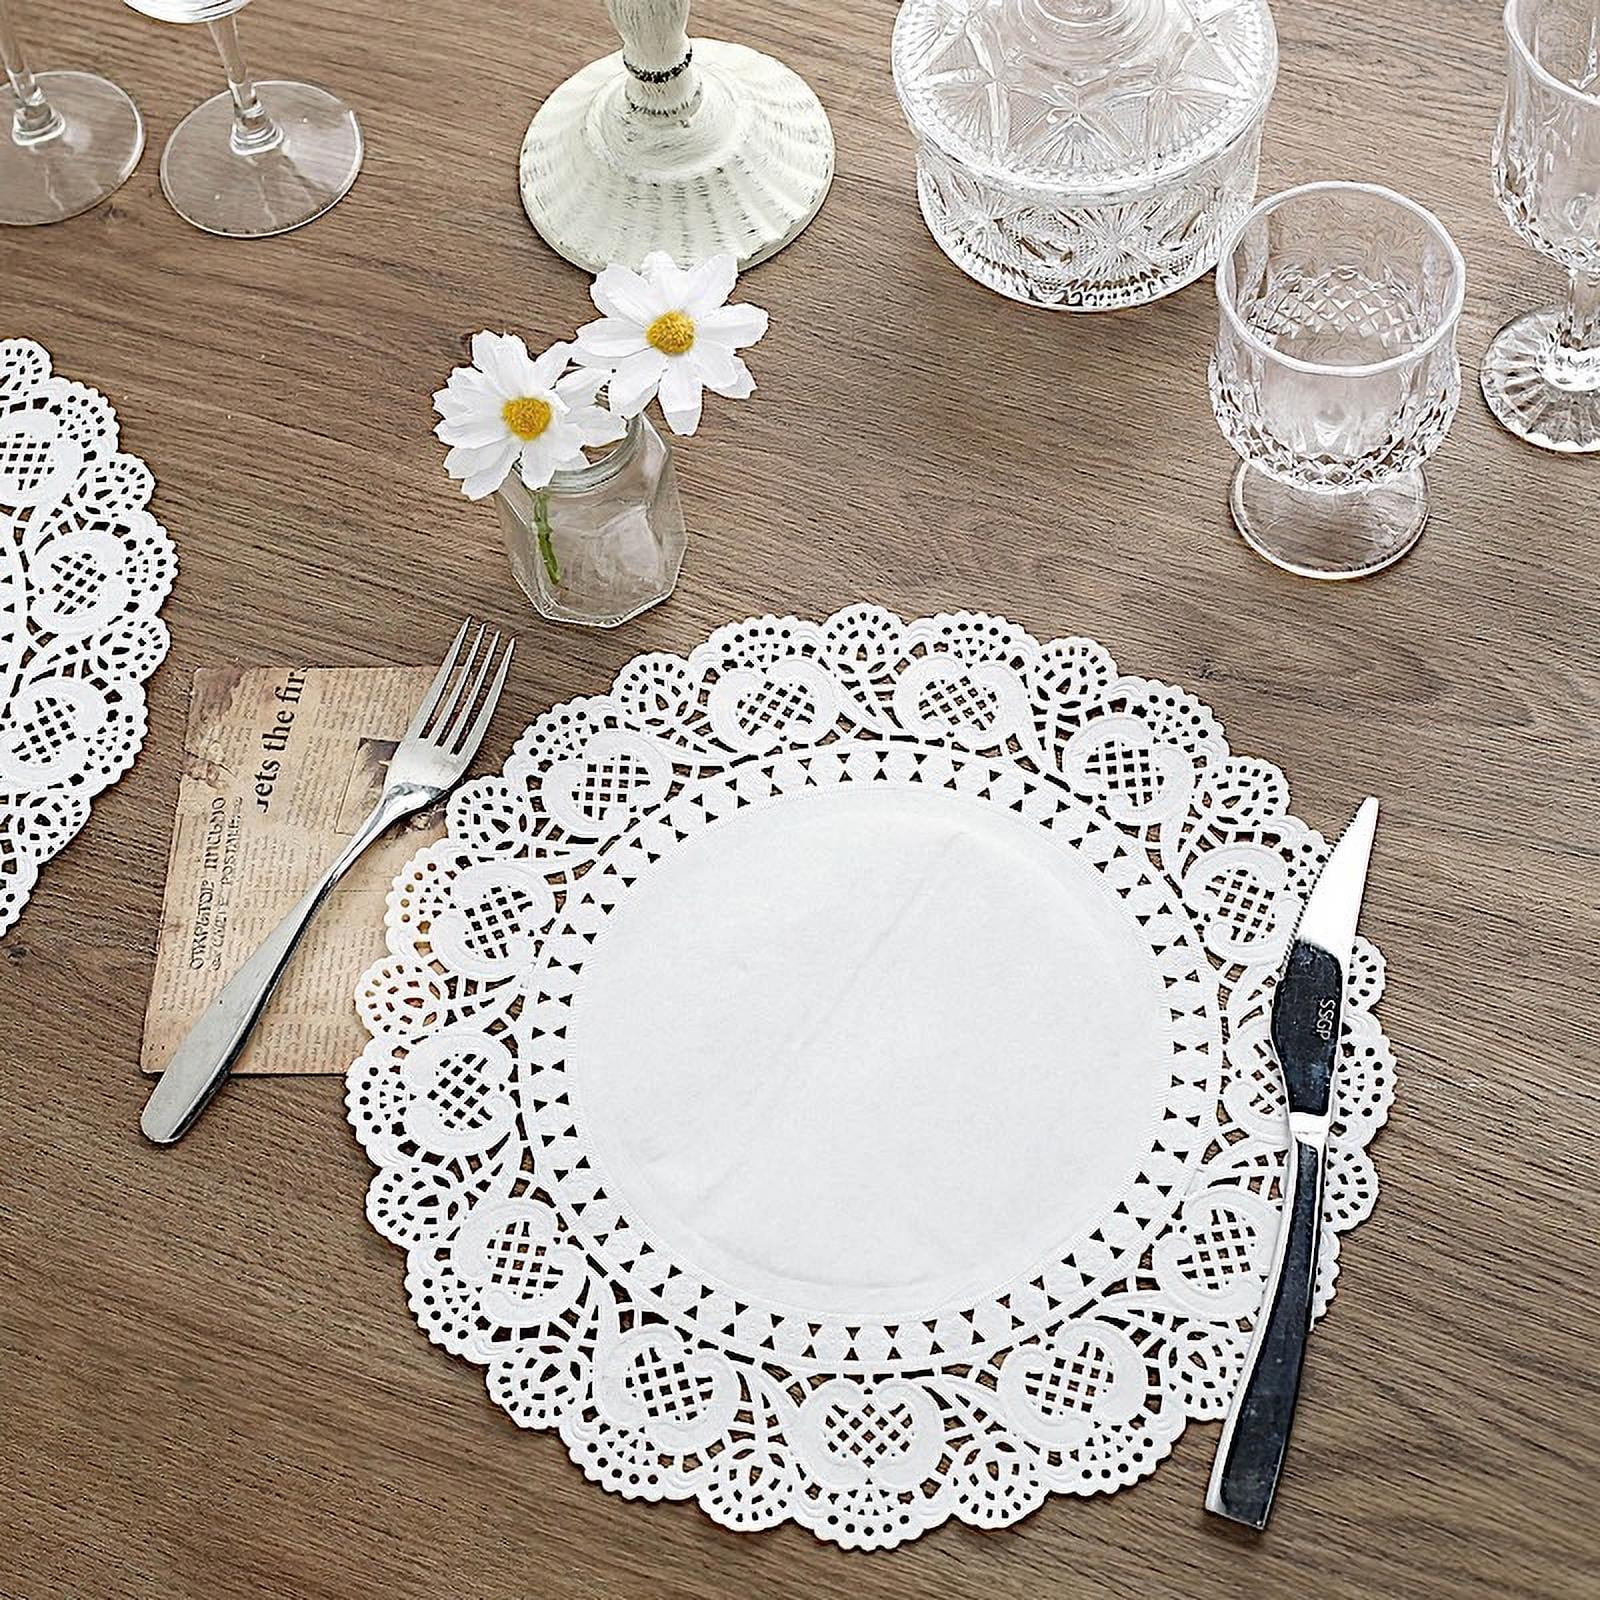 100 - 6 White FRENCH LACE Paper Doilies || White Paper Lace Doily